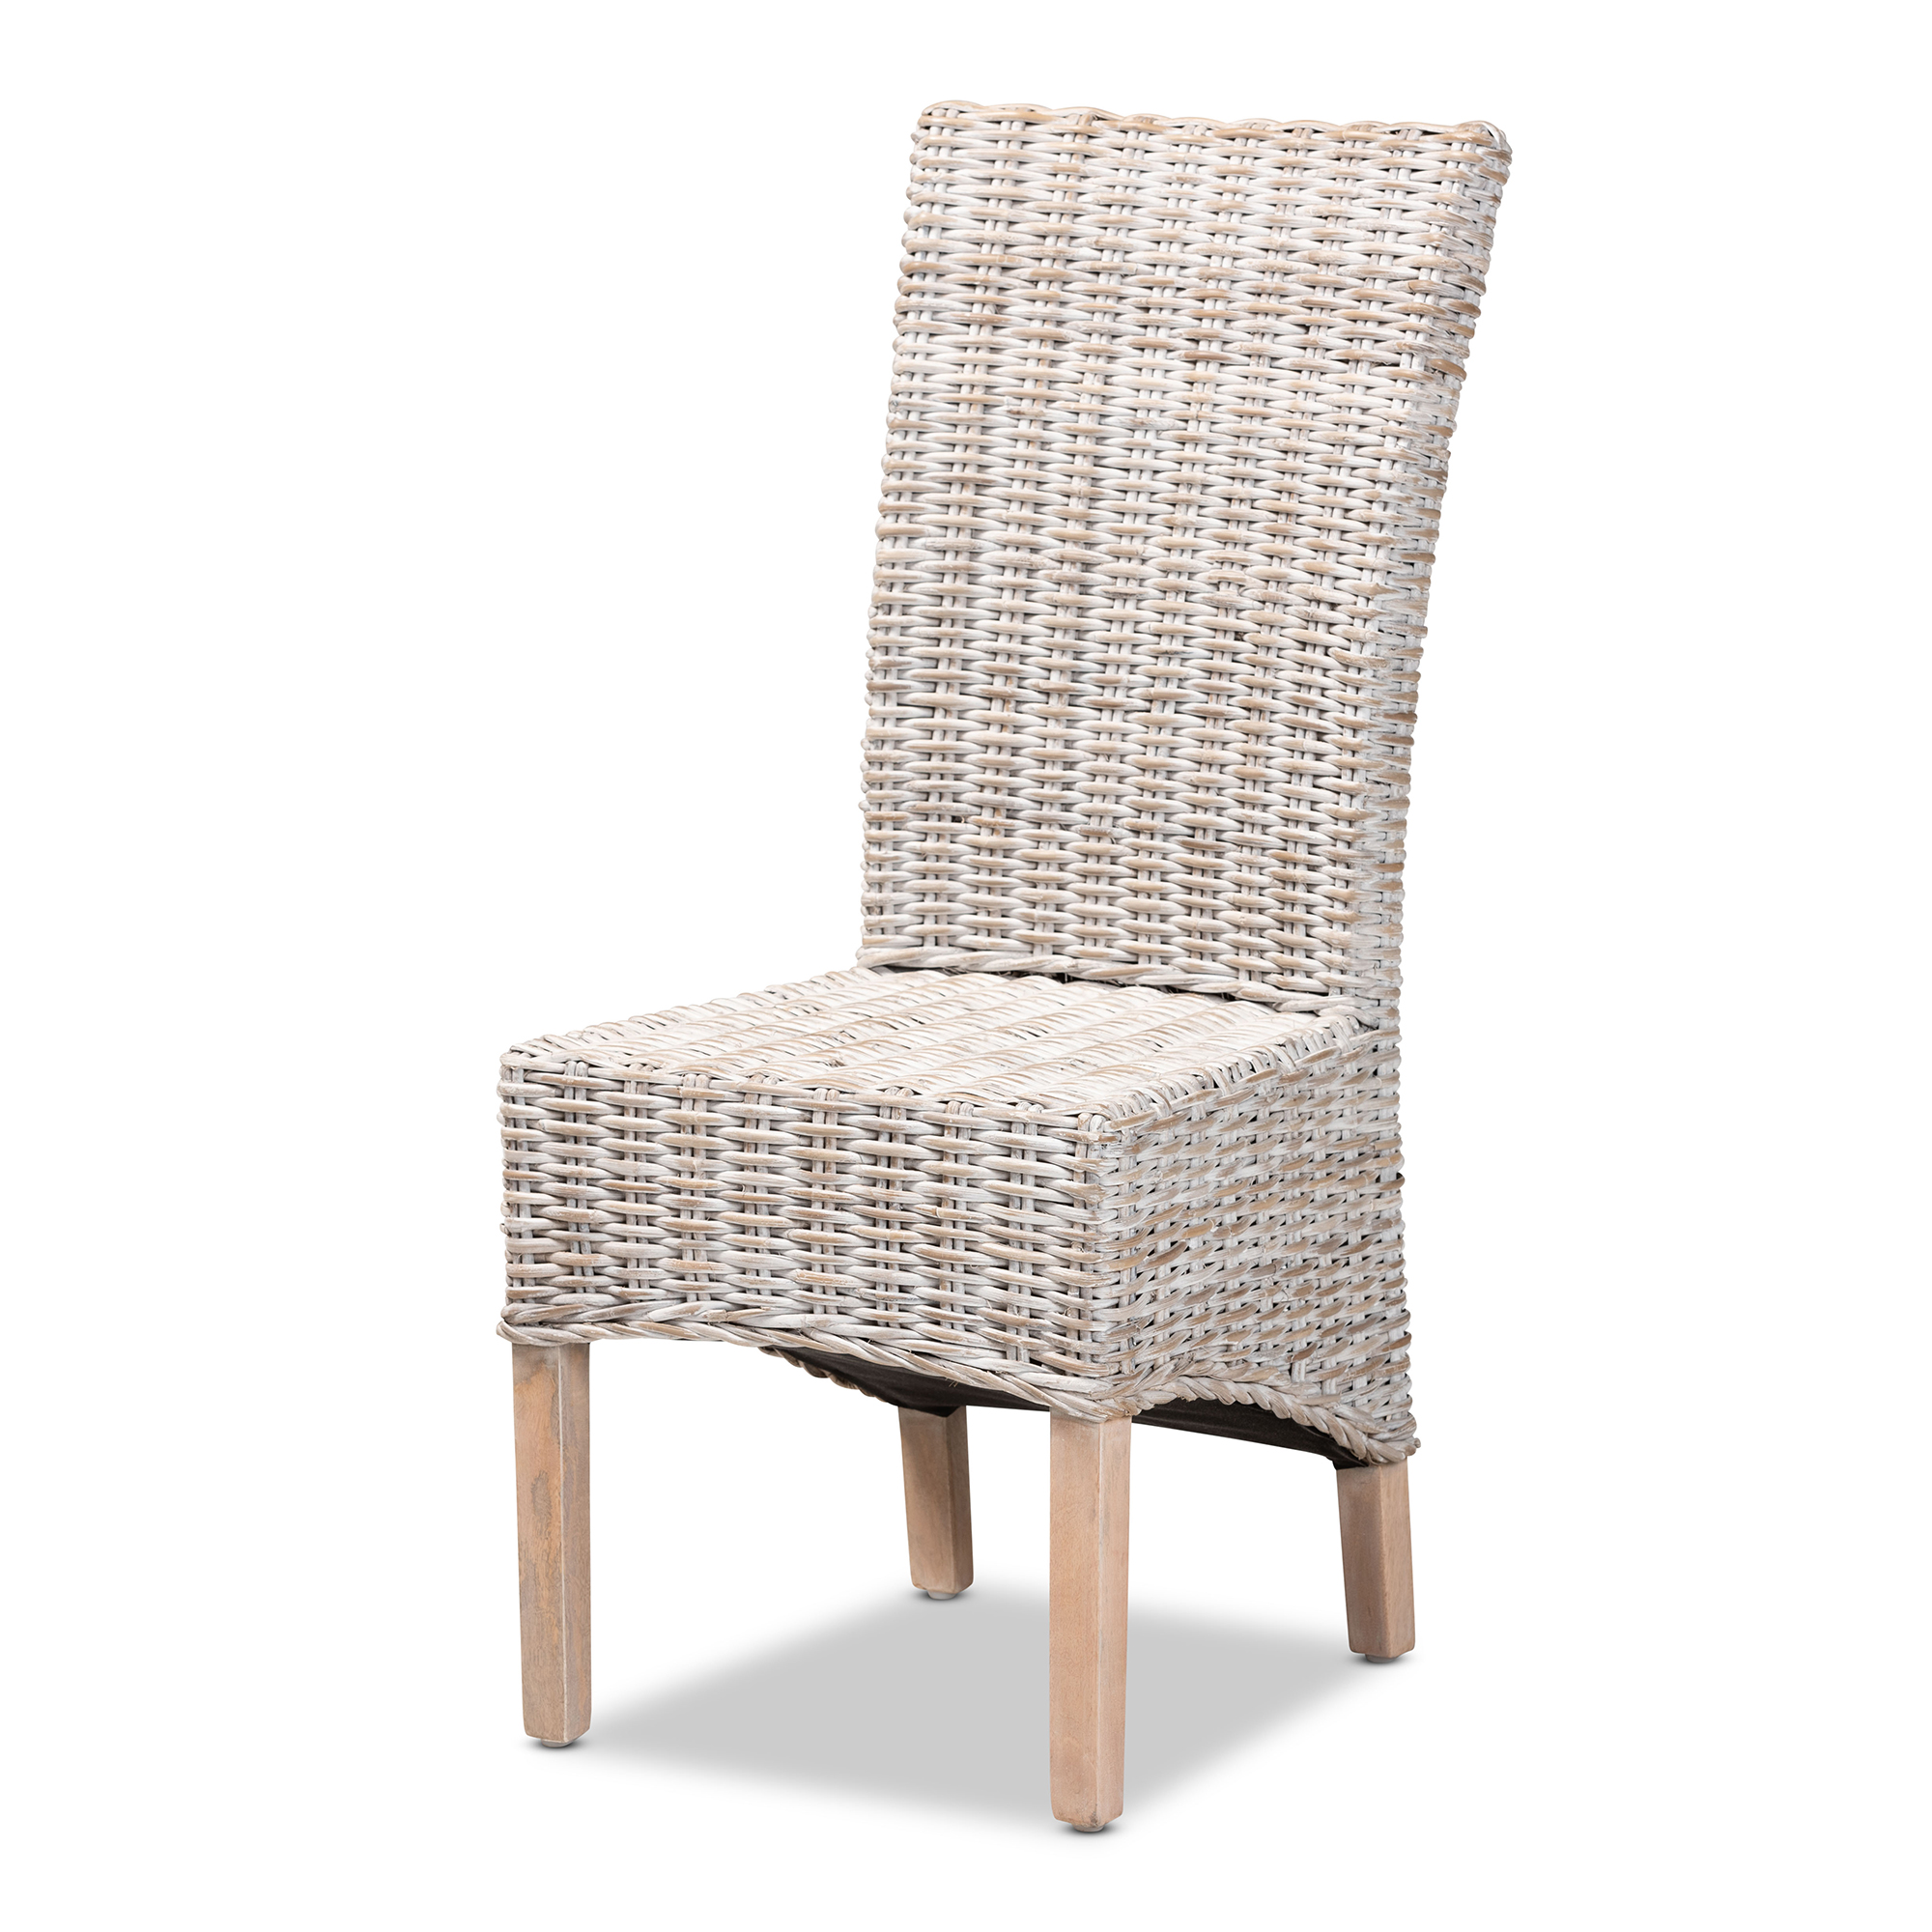 Baxton Studio Trianna Rustic Transitional Whitewashed Rattan and Natural Brown Finished Wood Dining Chair